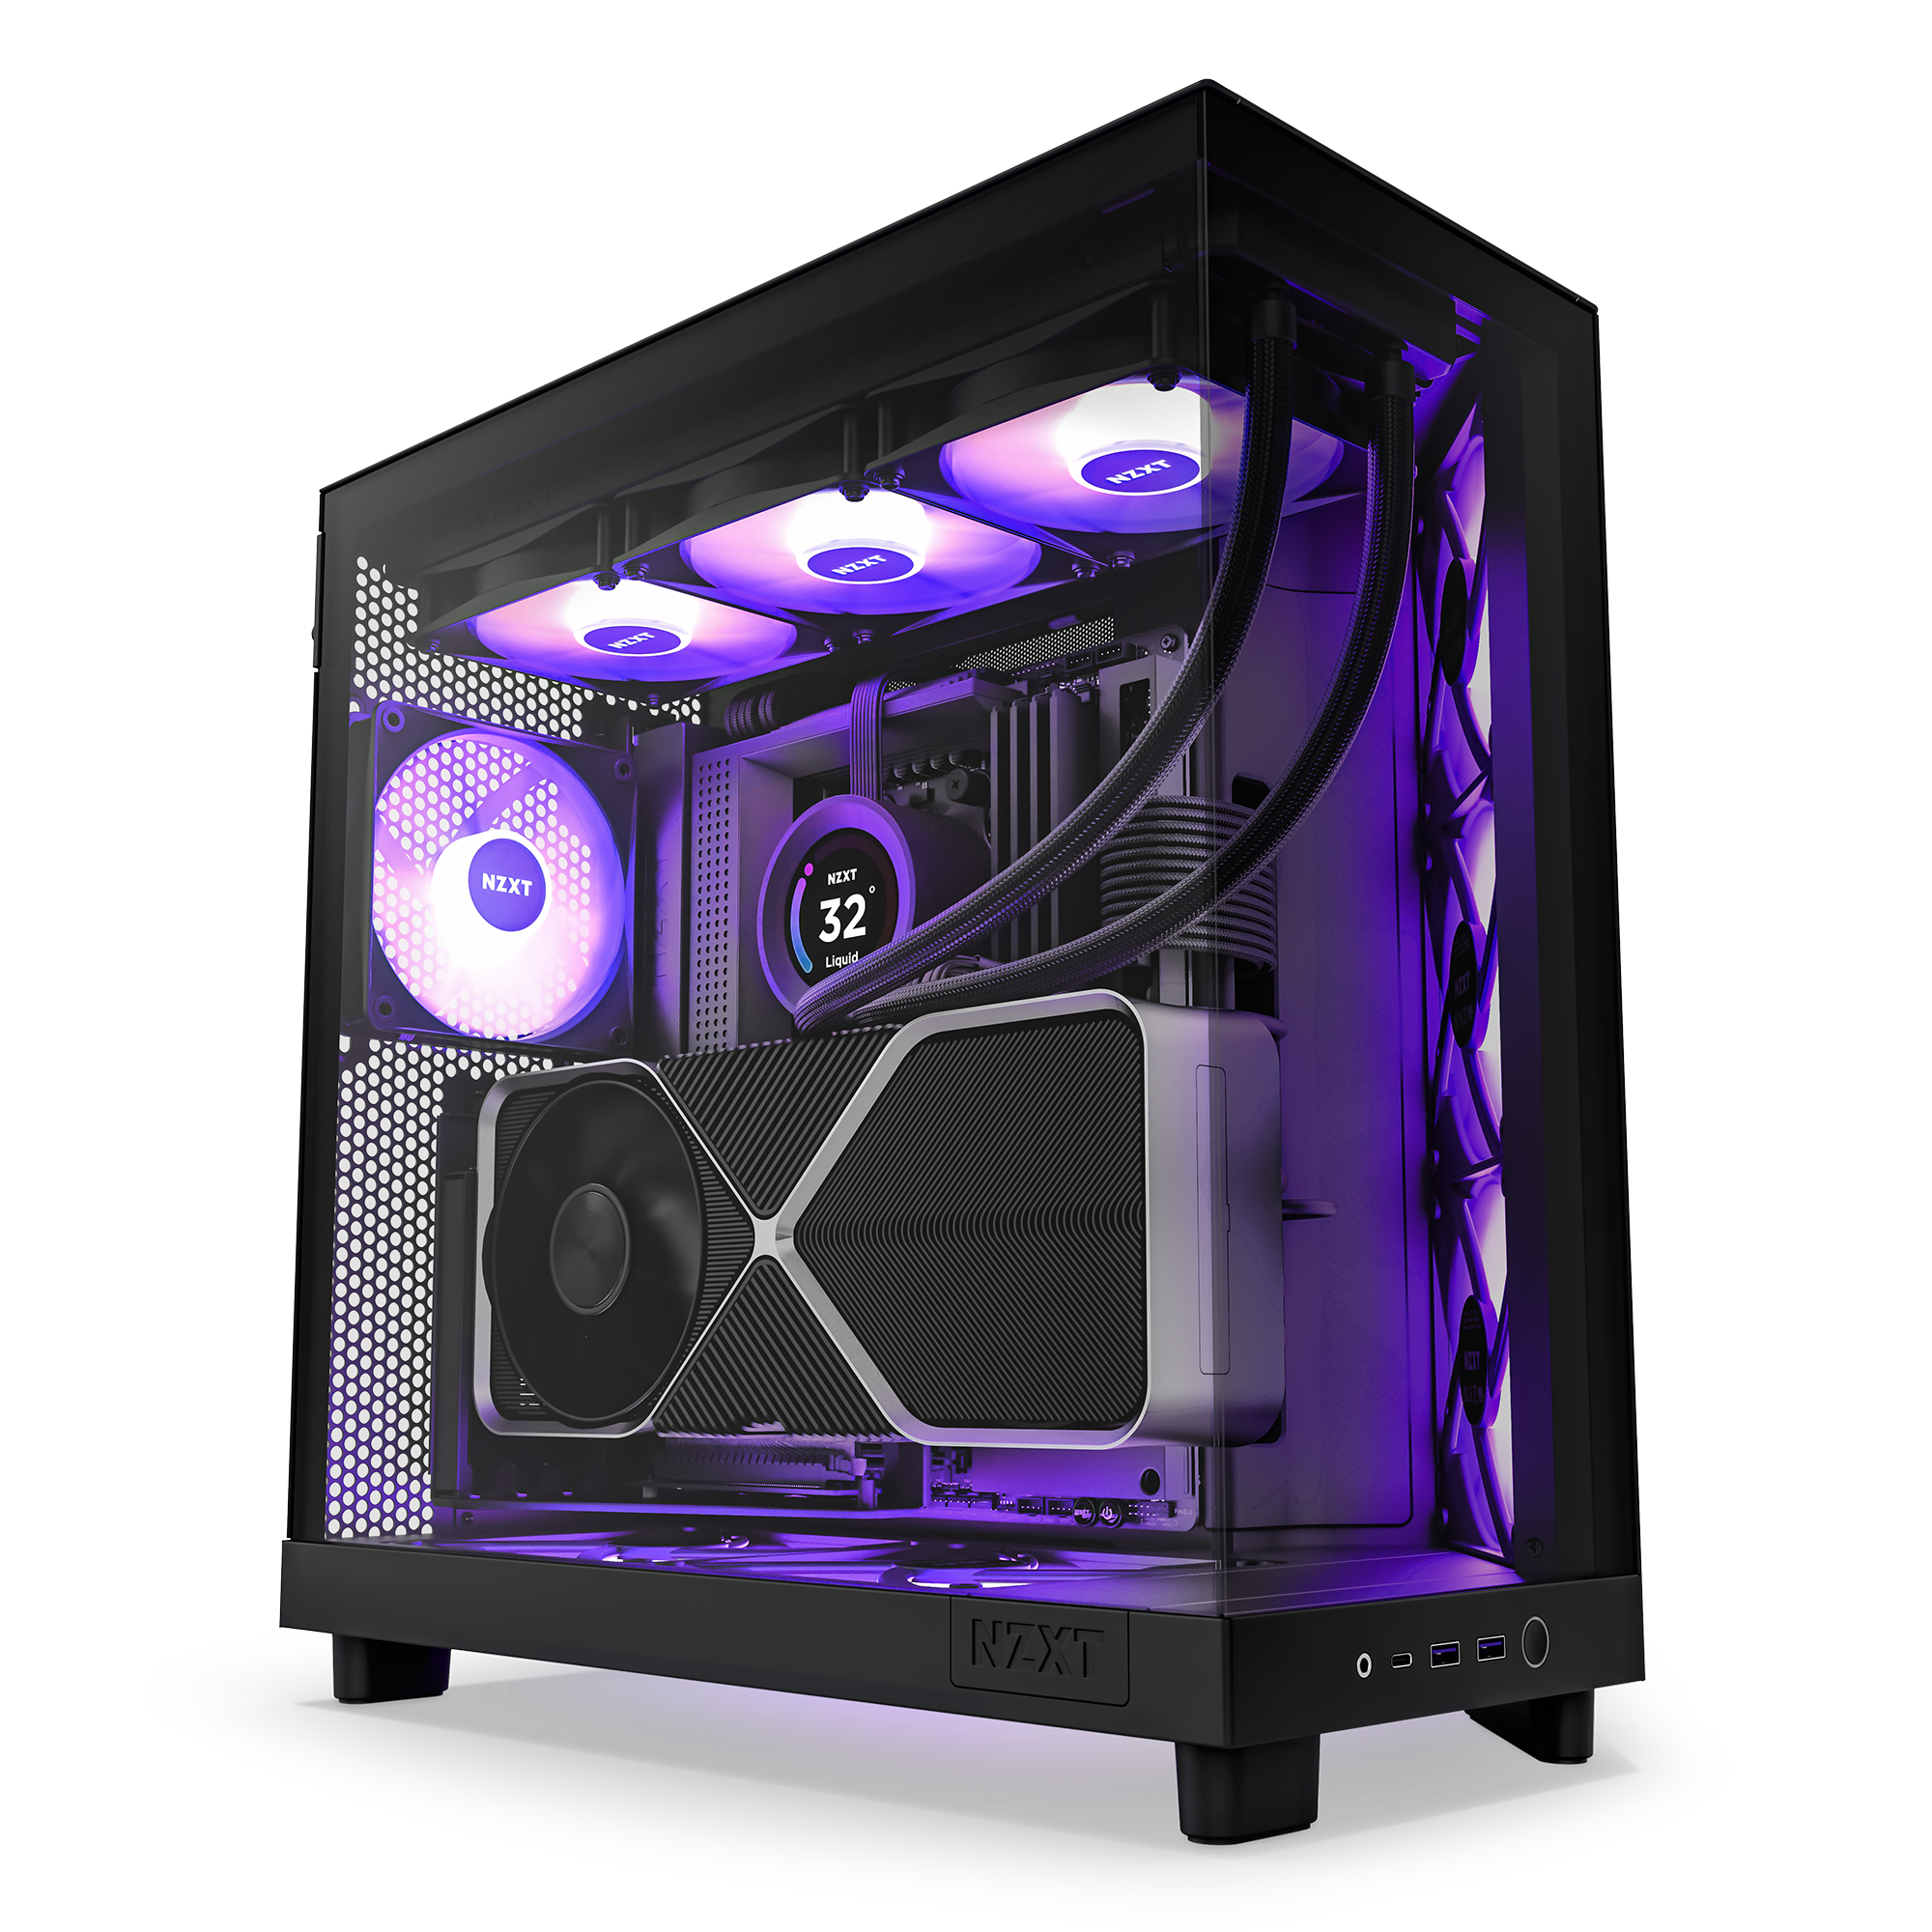 MasterProductions on Instagram: New Arrival !!! NZXT H6 Flow RGB - Compact  Dual-Chamber Mid-Tower AirFlow Case Available in Black & White Color !!!  Order yours now www.masterproductionsbh.com 17401204